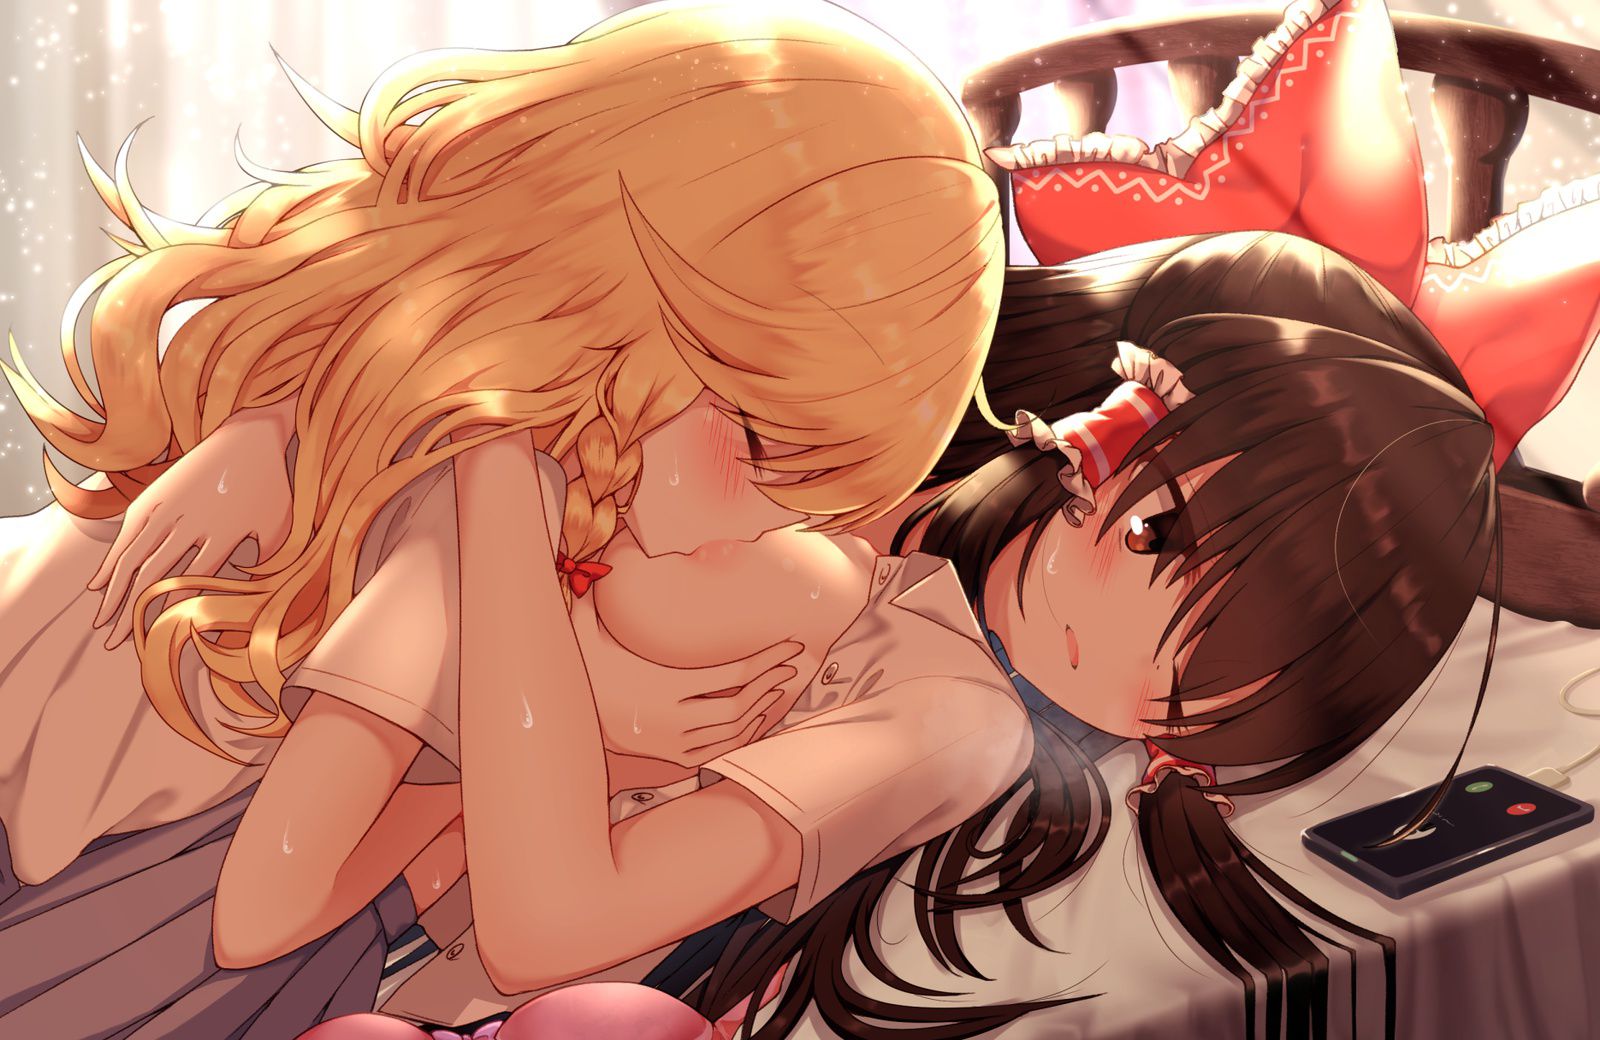 【Touhou Project】Drizzle Marisa's Erotic Image Part 14 16